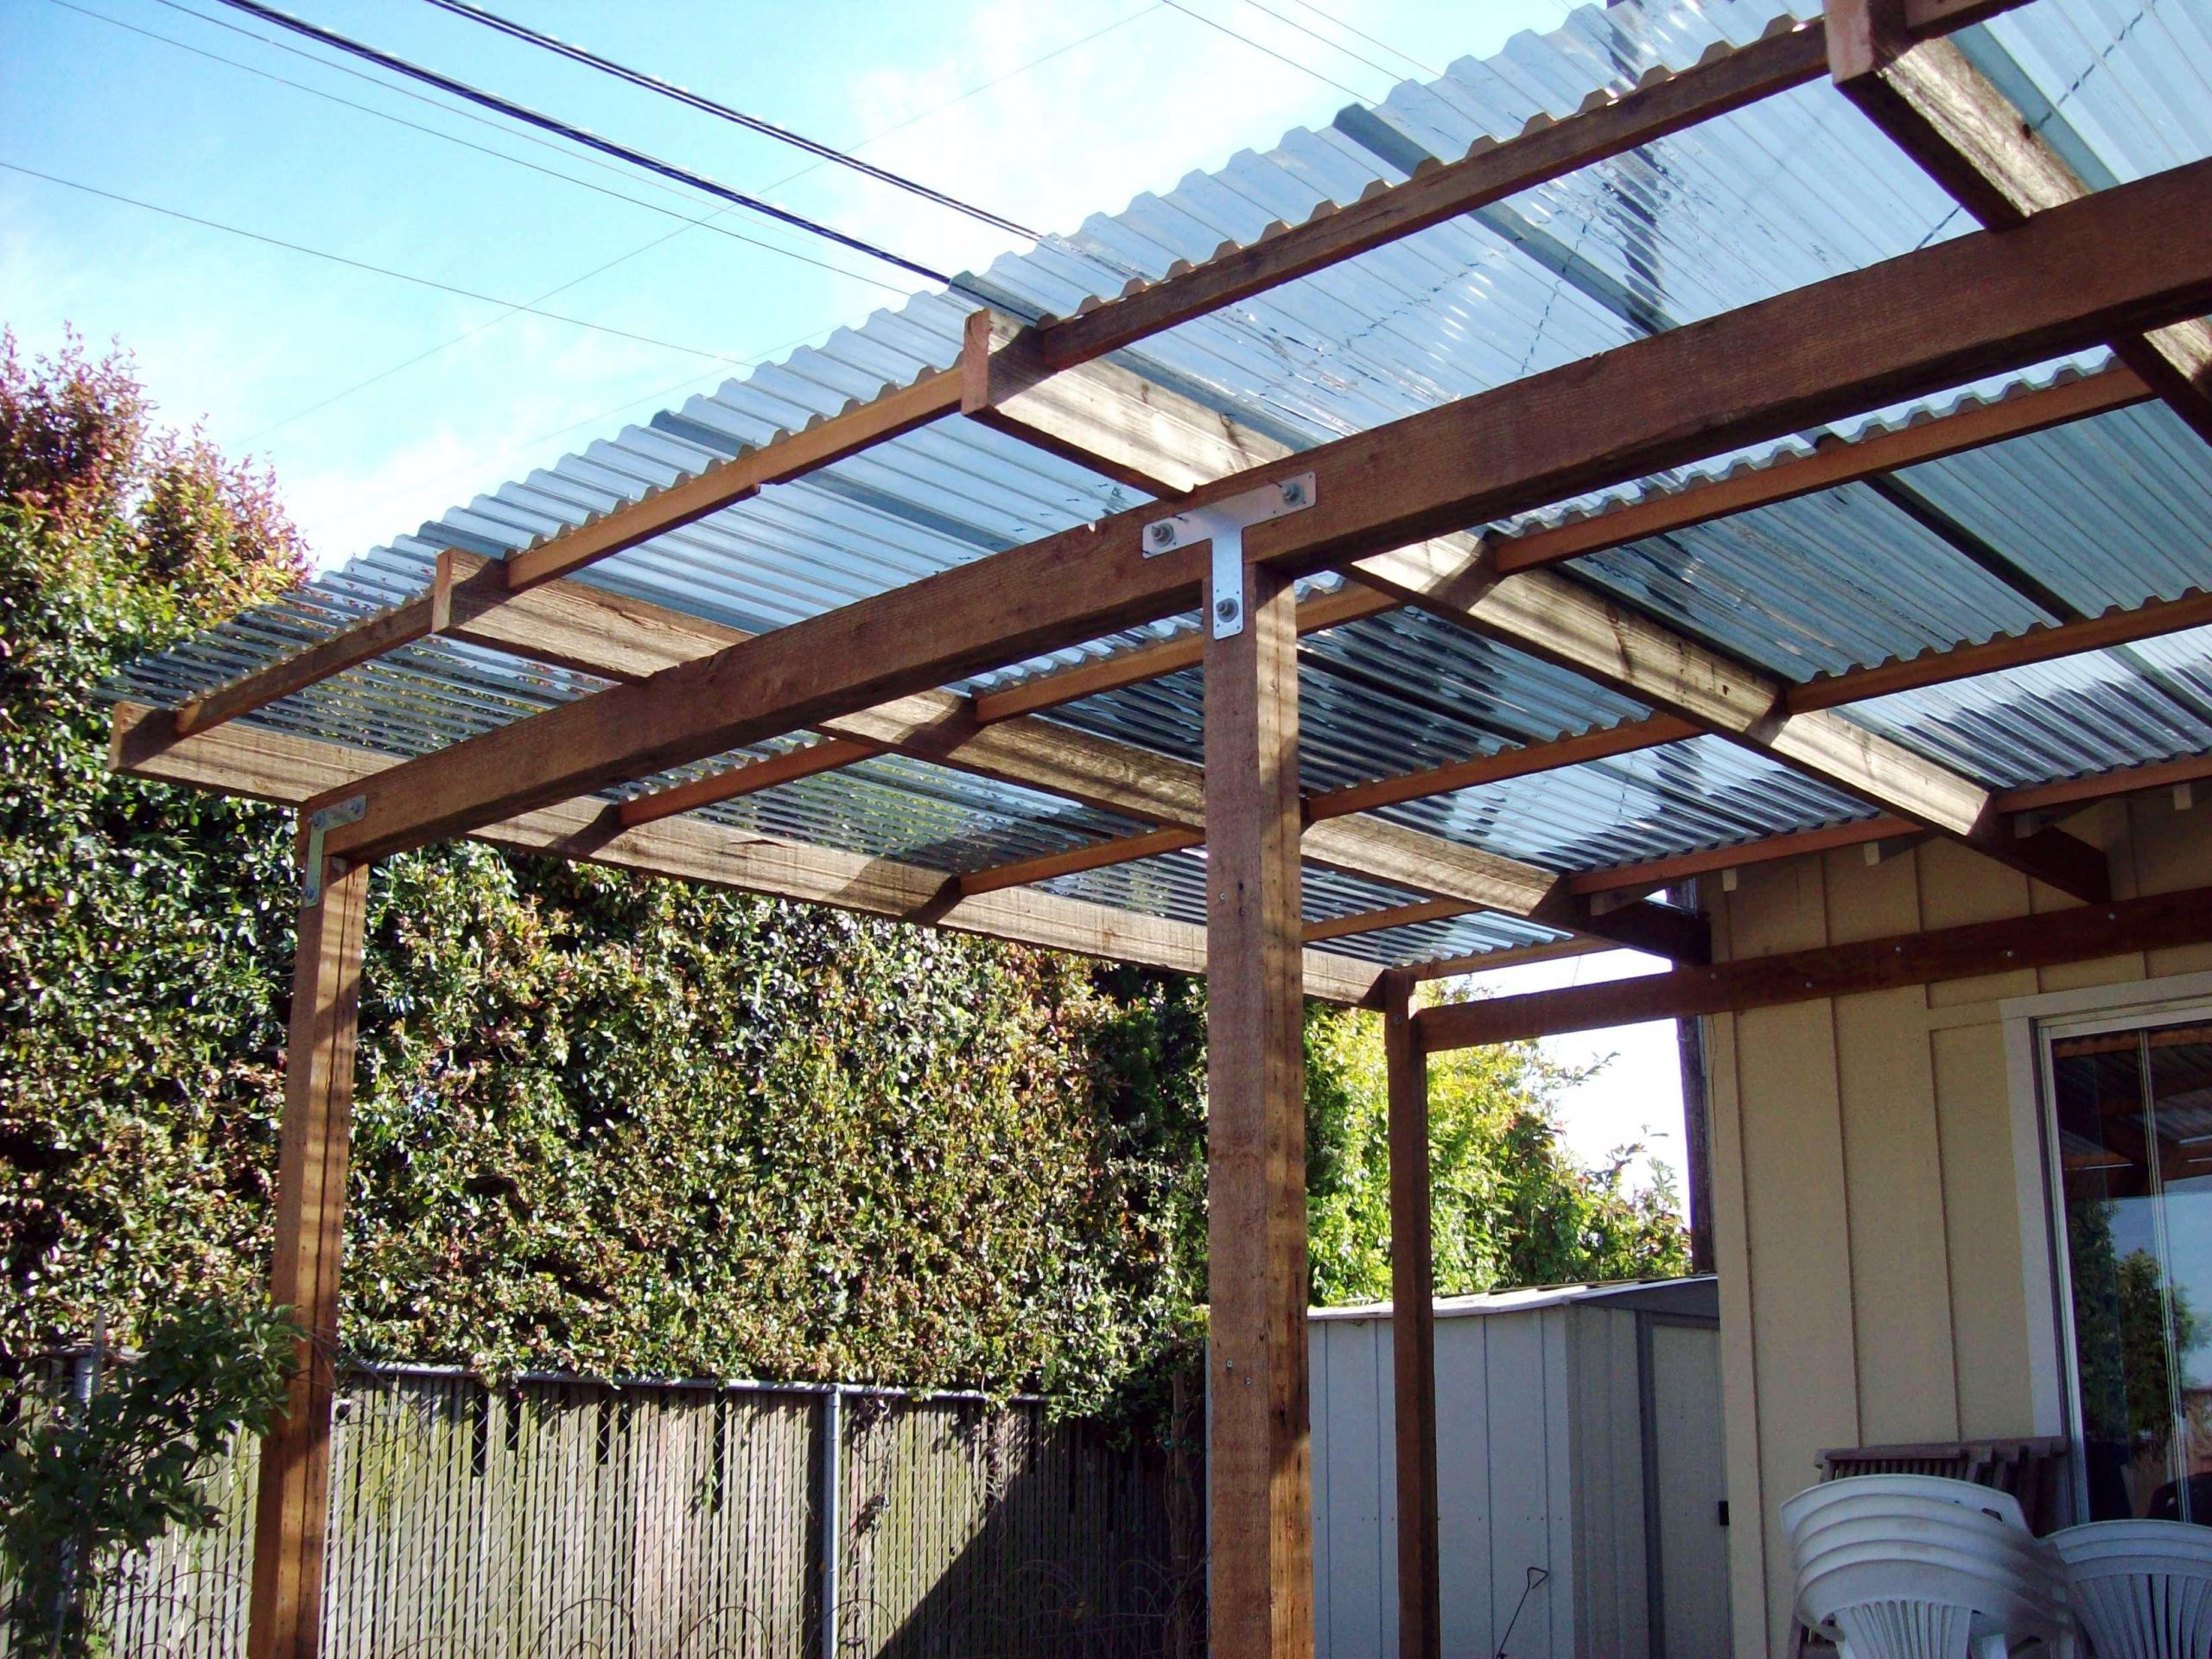 How To Build A Patio Cover Out Of Wood